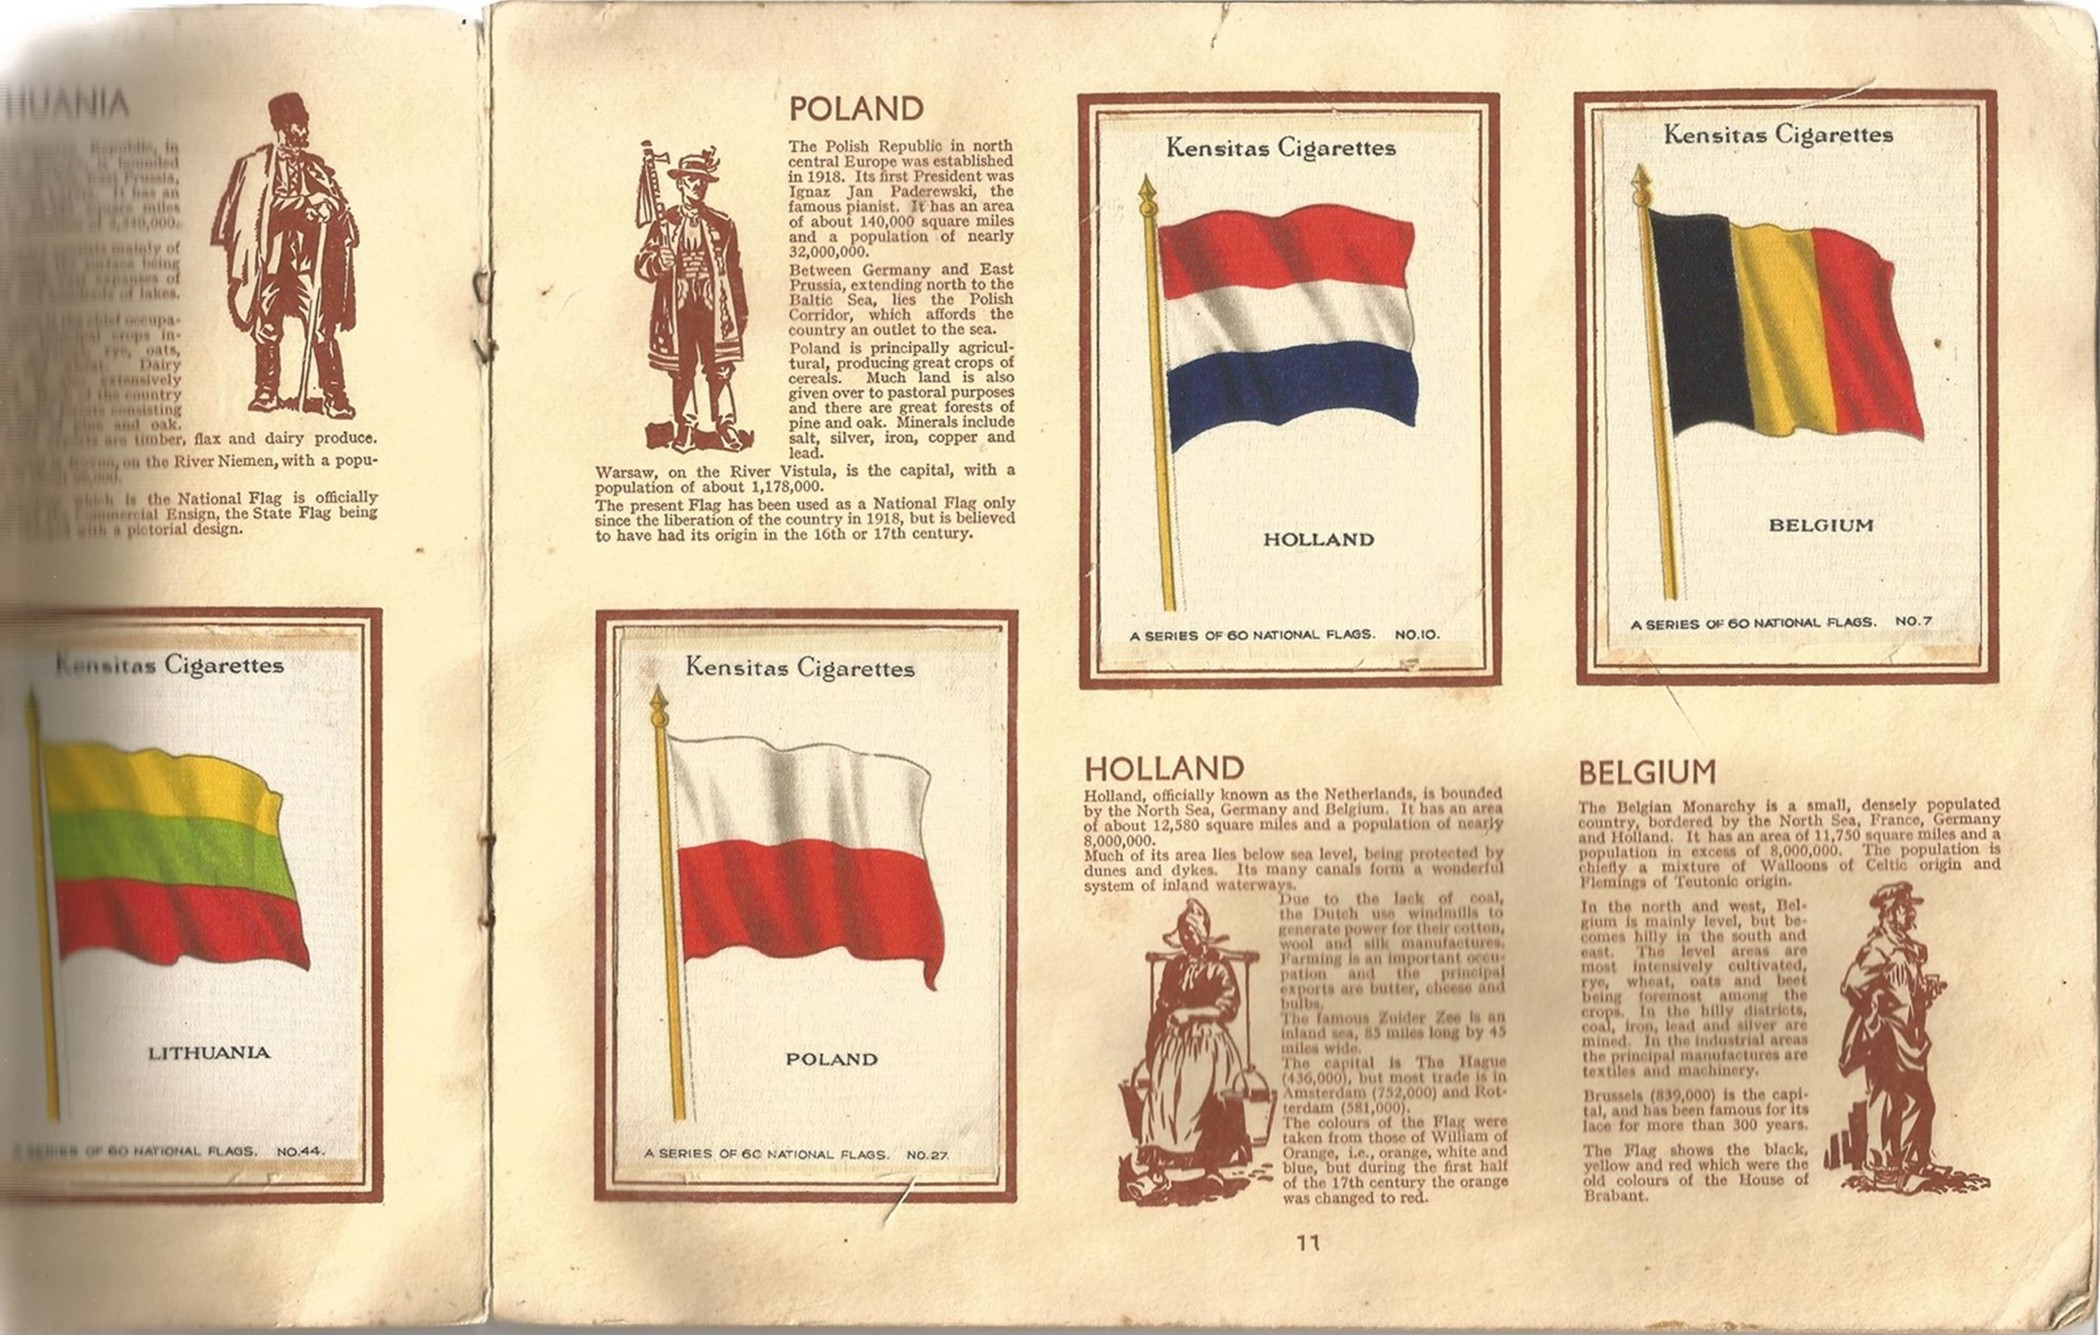 Collectors Cards / Cigarette Cards The Kensitas Album of National Flags (J Wix & Sons Ltd) some - Image 2 of 4